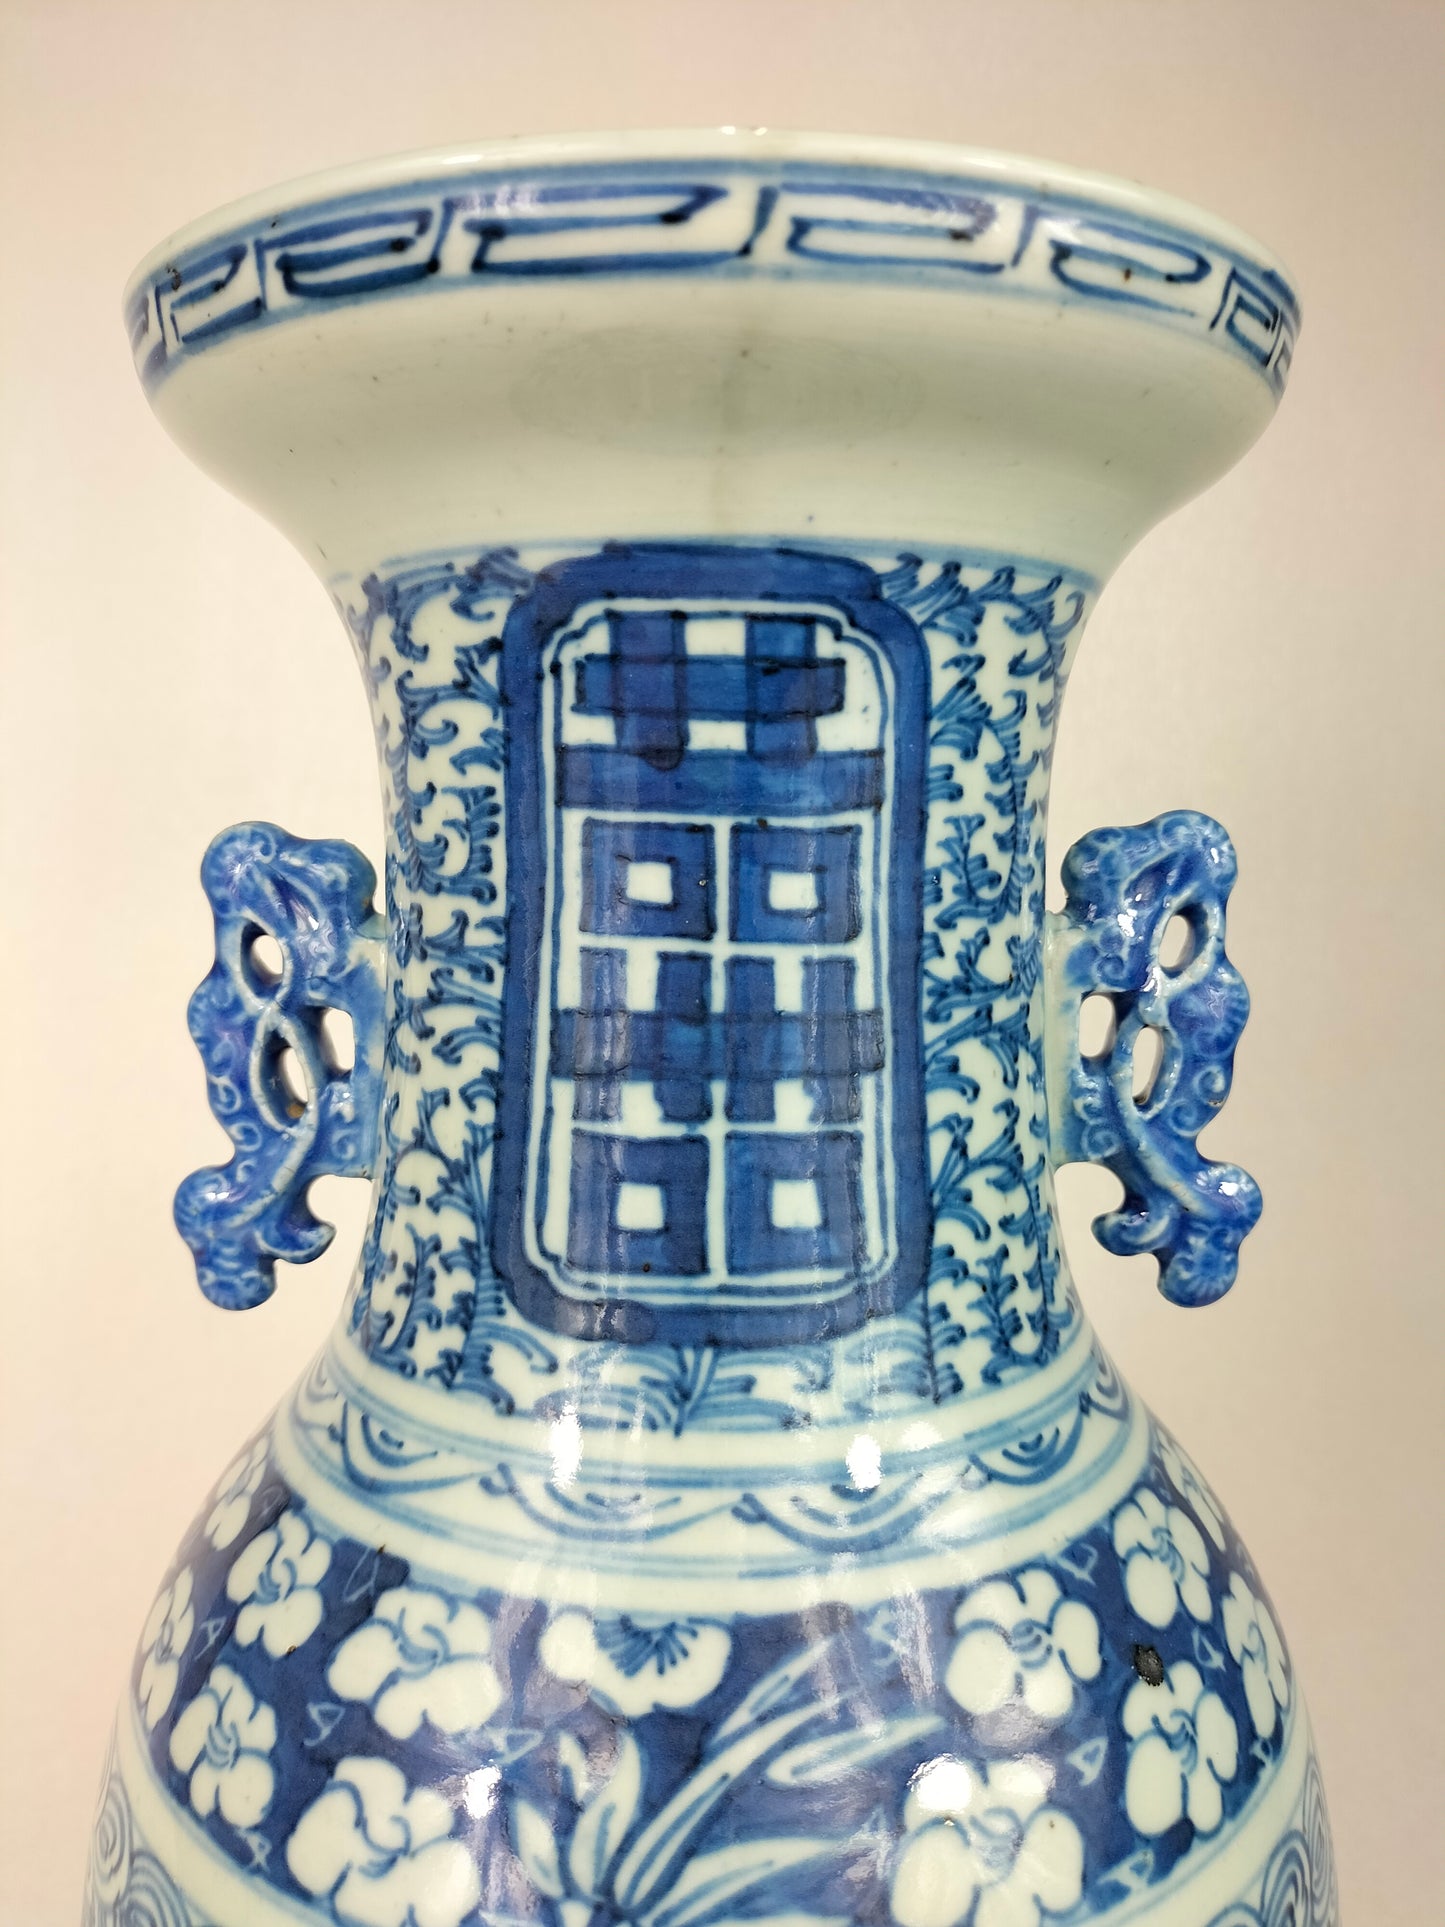 Antique Chinese double happiness vase // Blue and white - Qing Dynasty - 19th century